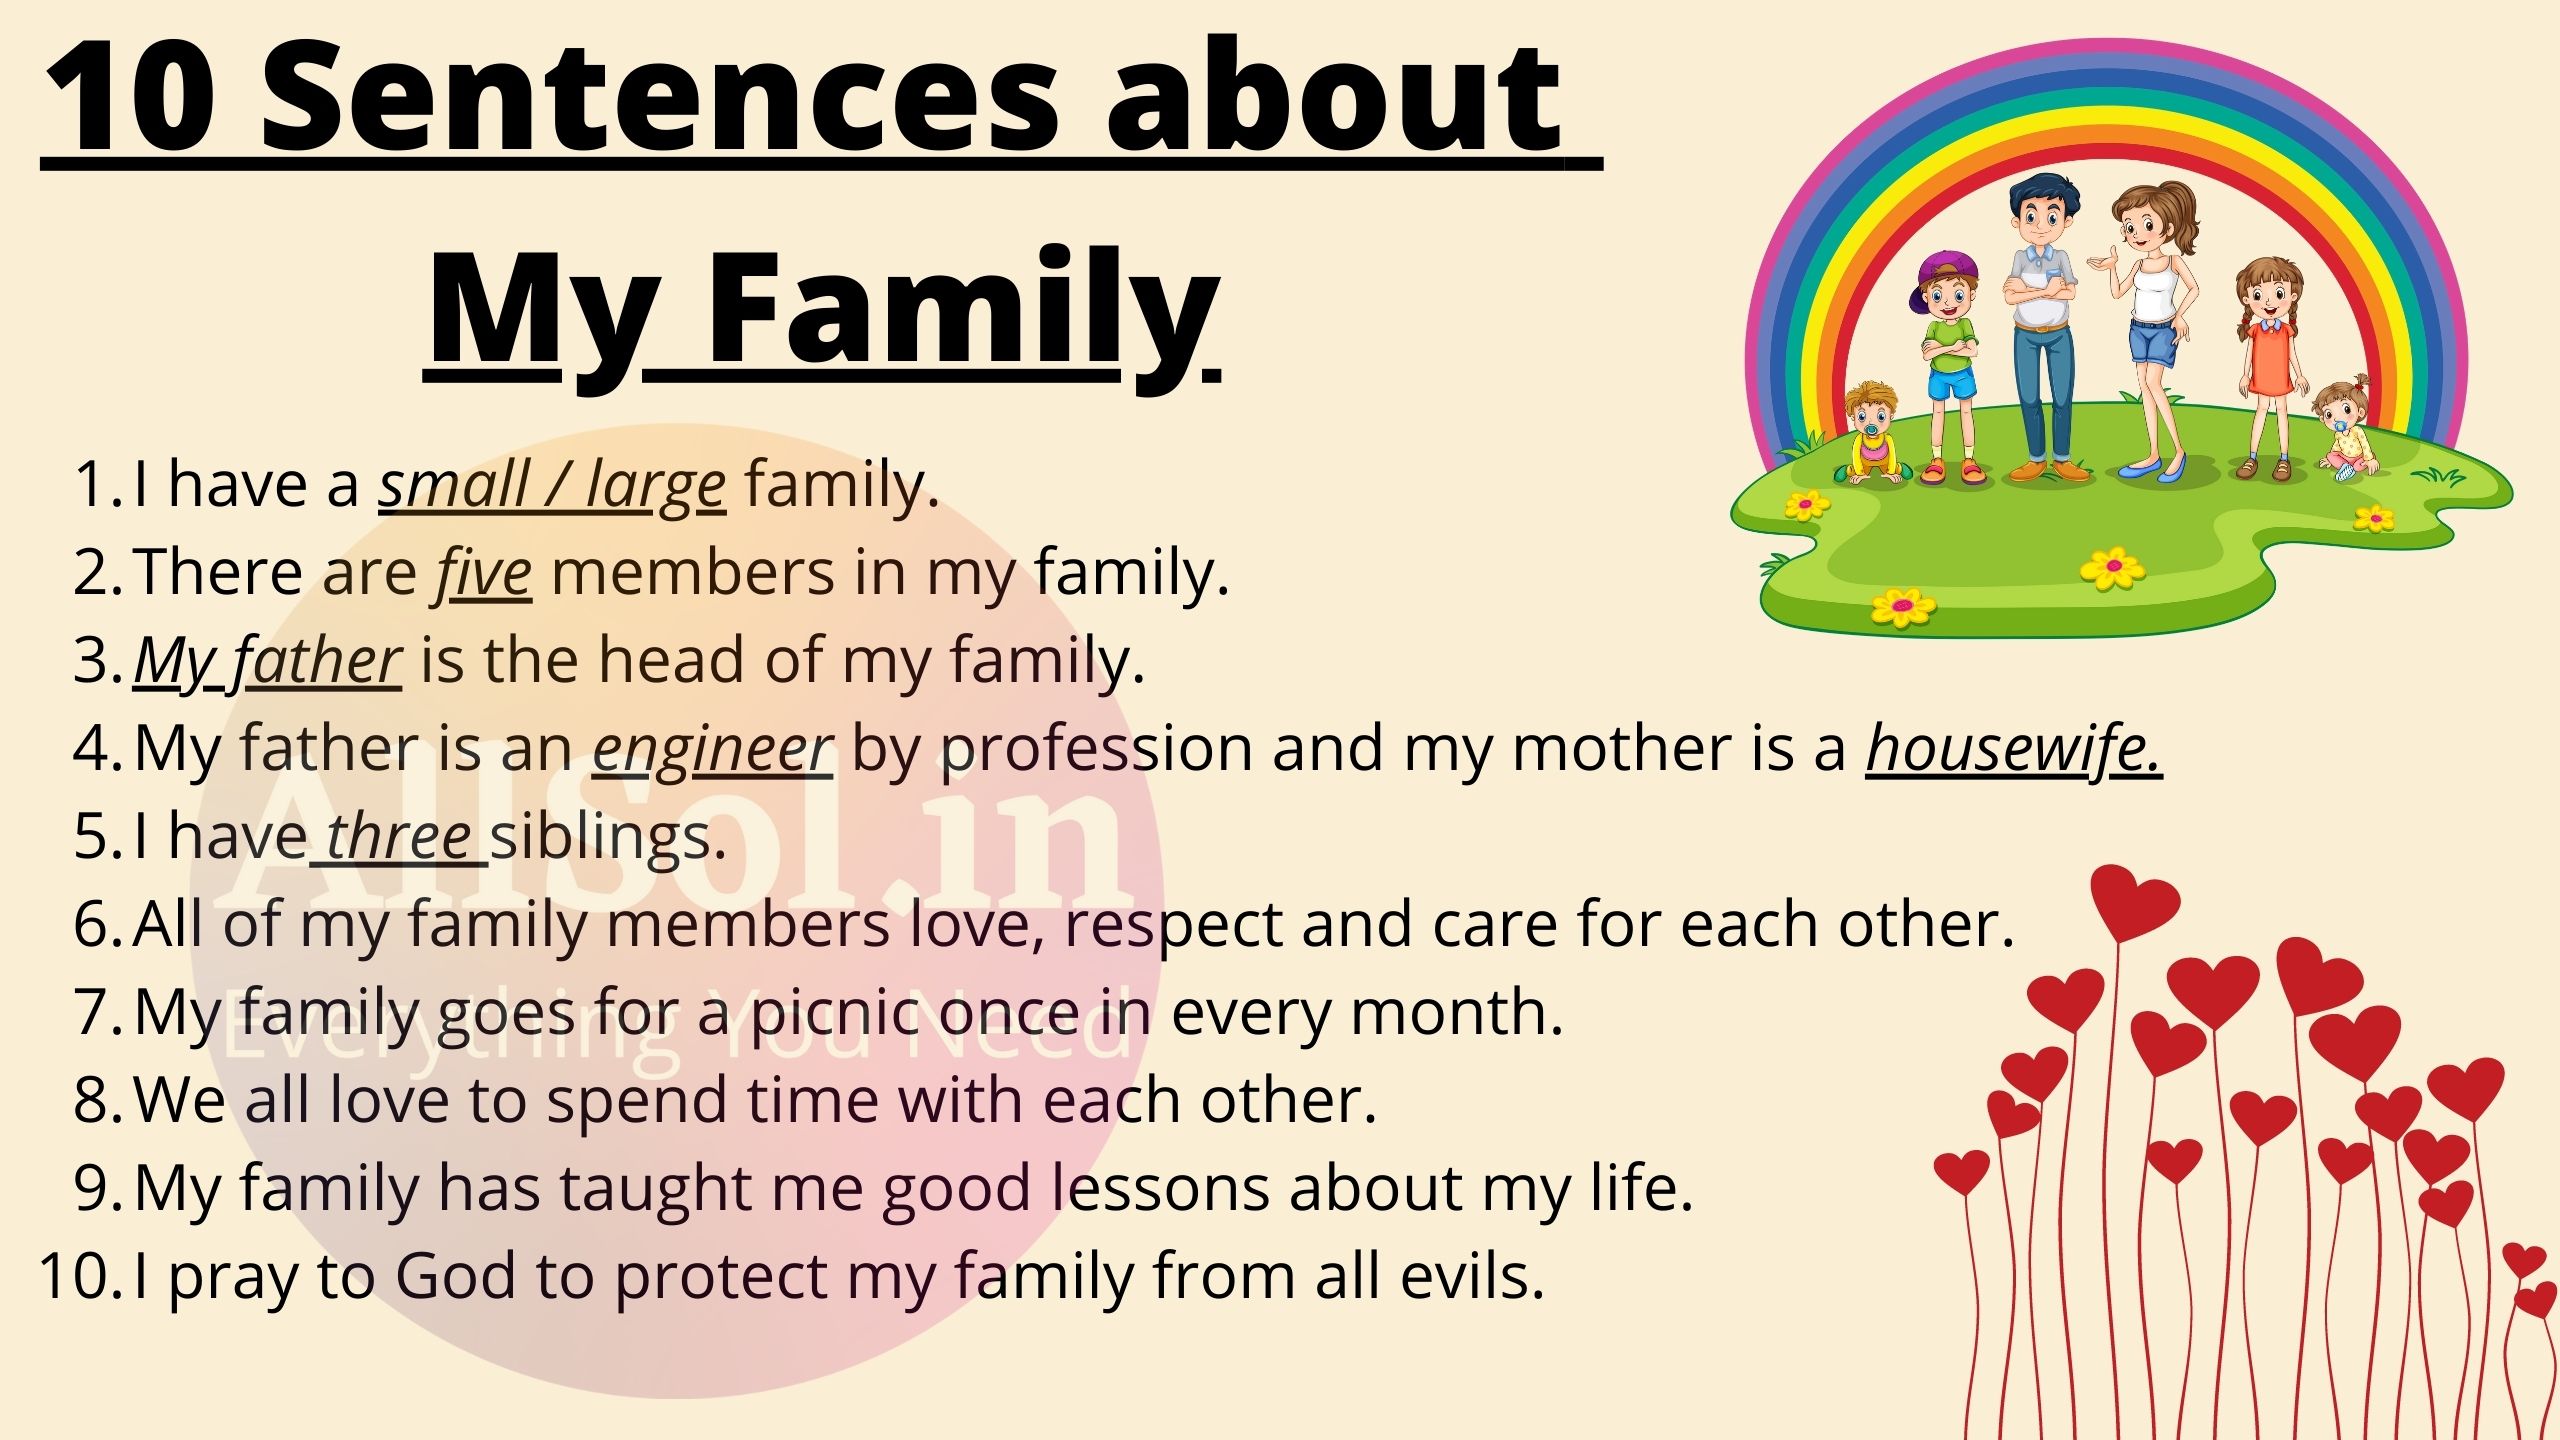 10 Sentences about My Family